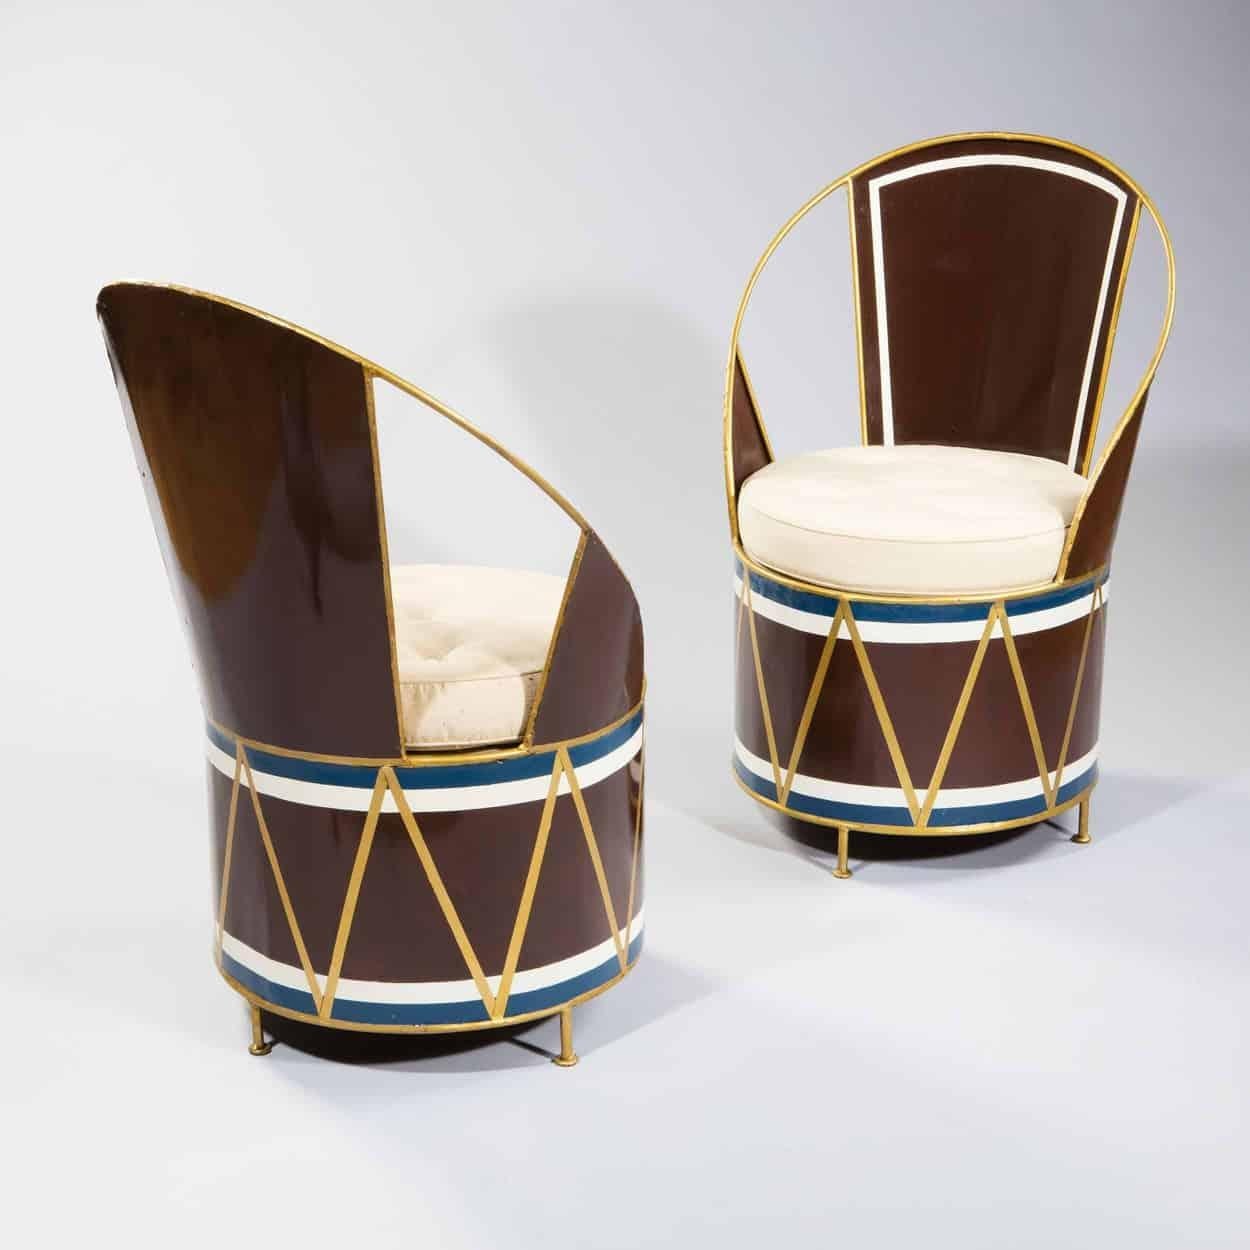 France, circa 1940

A set of 6 modernist tole cafe chairs decorated on a brown ground with the stylized decoration of a military drum, the back and feet in oil gilt.

Measures: Height 35 in (88 cm), width 22in (56 cm).